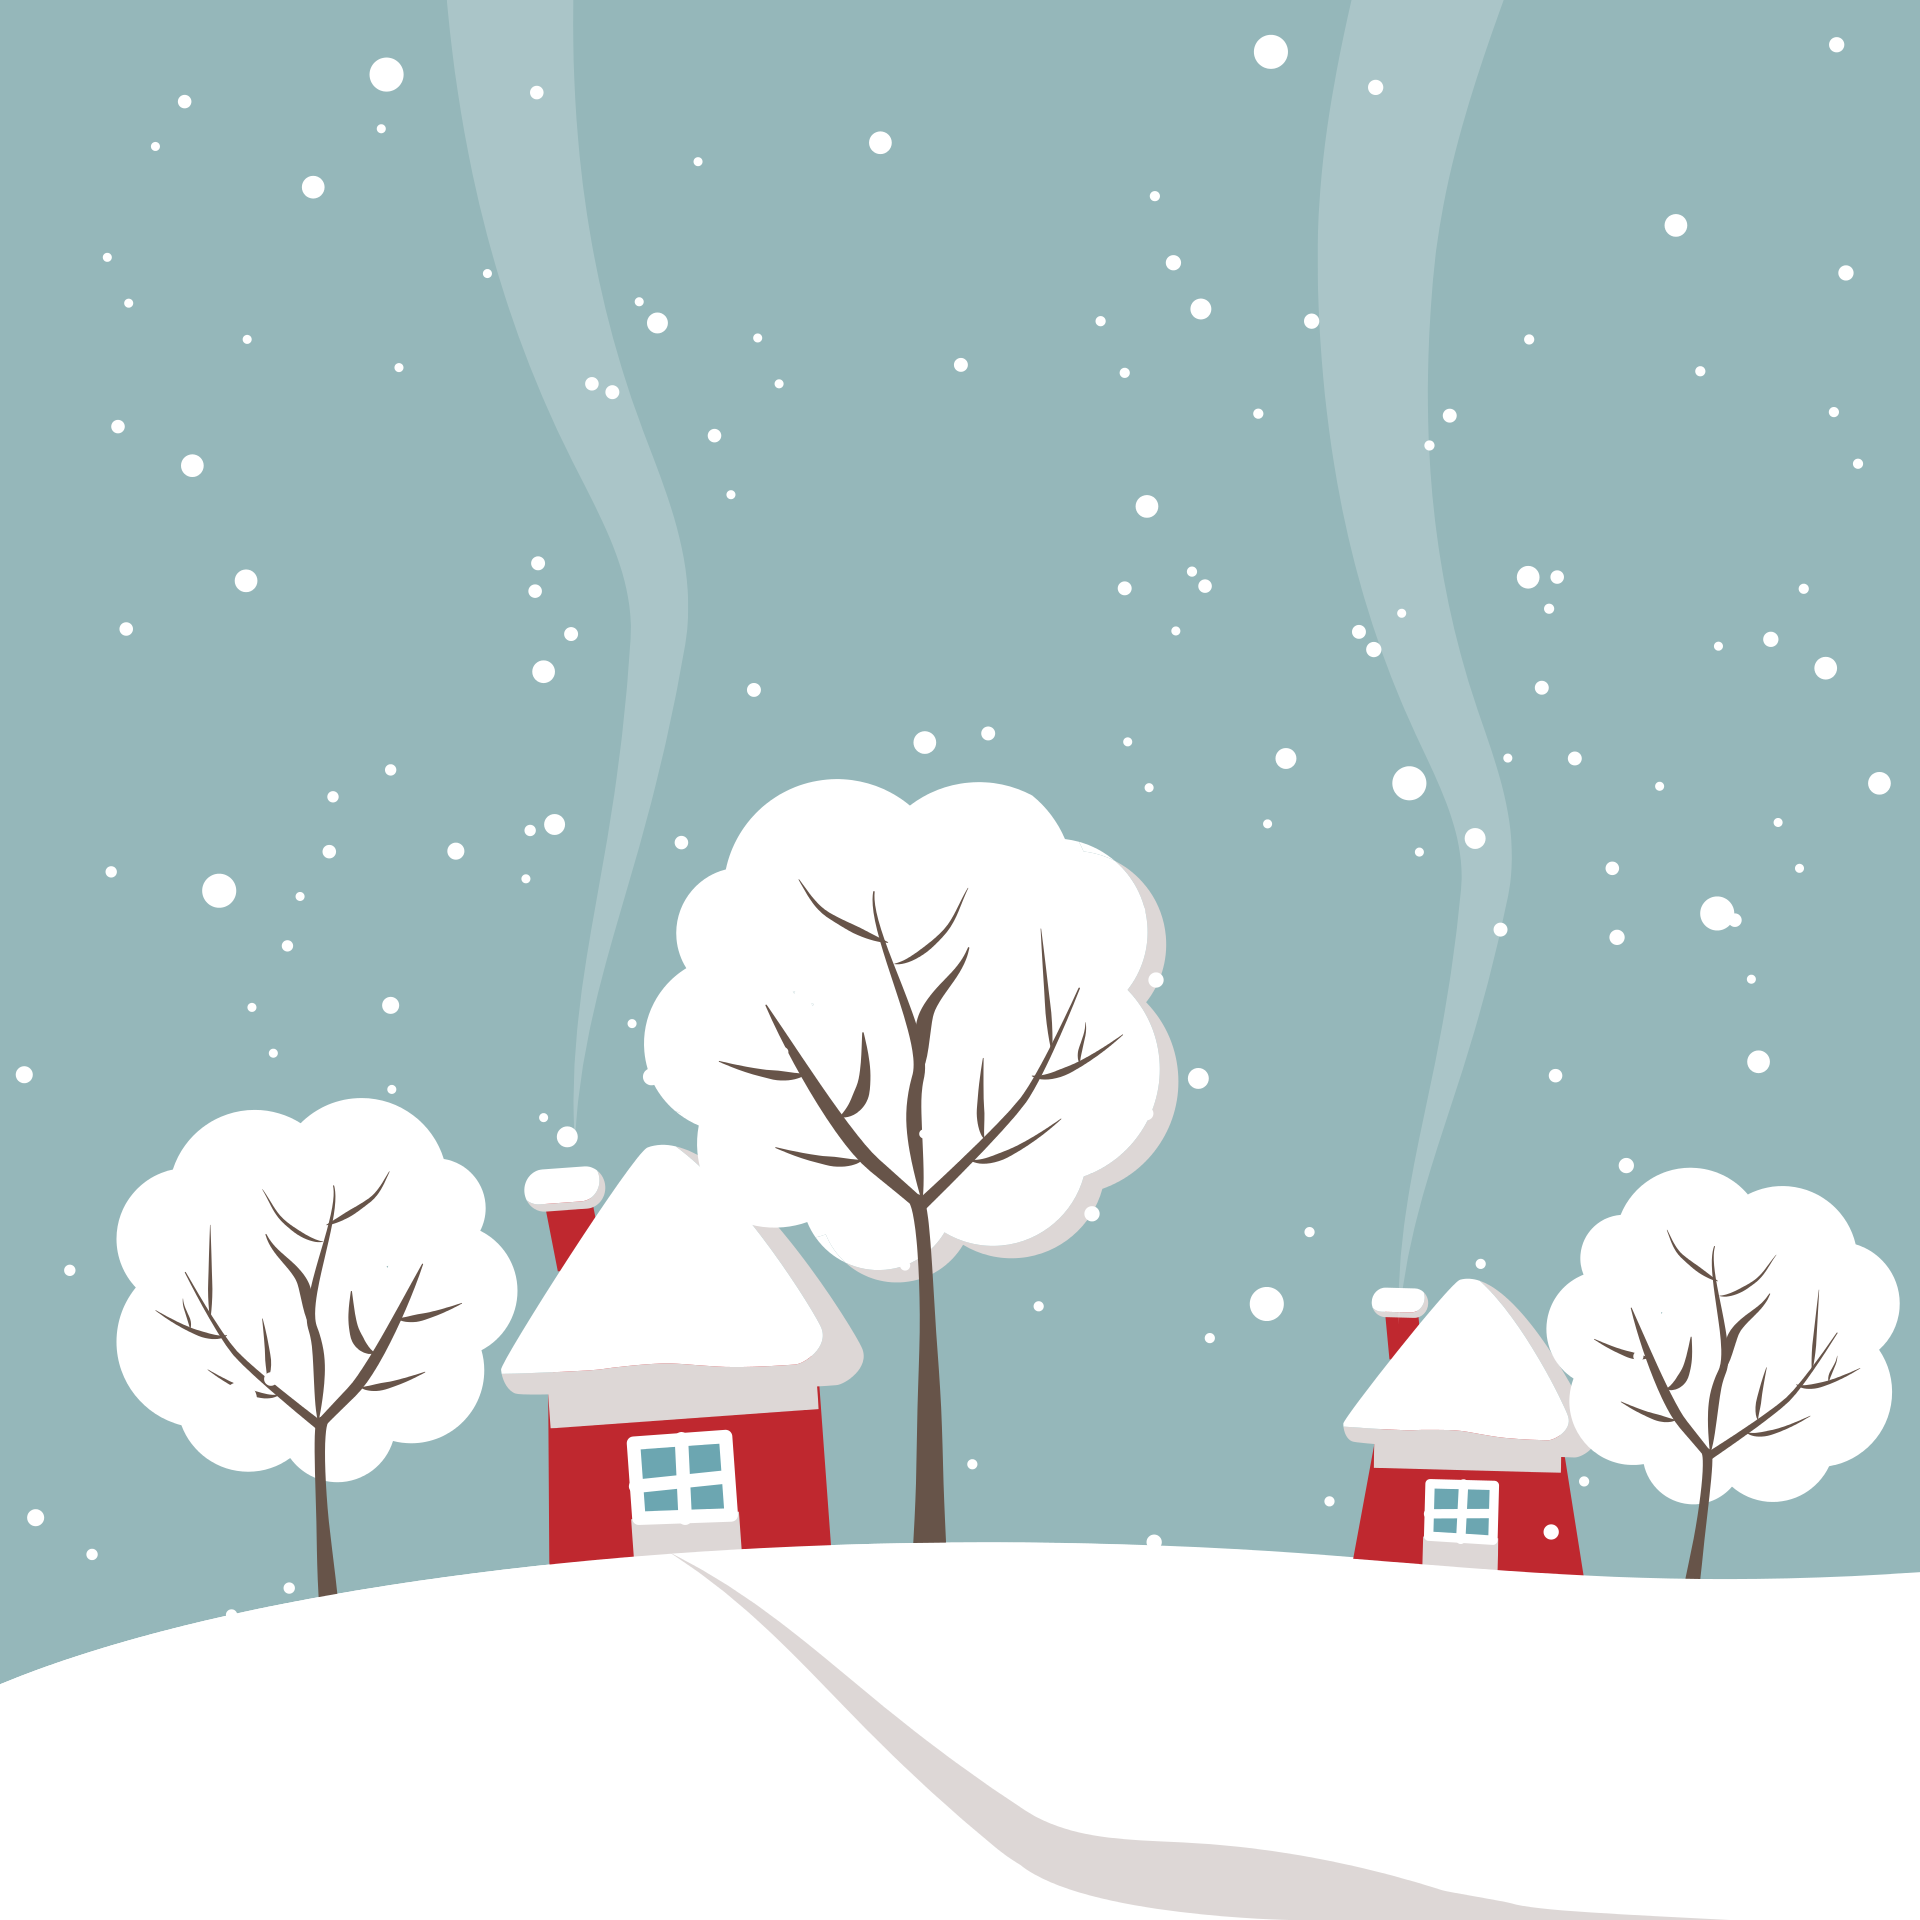 Illustration of a winter scene with trees and houses.